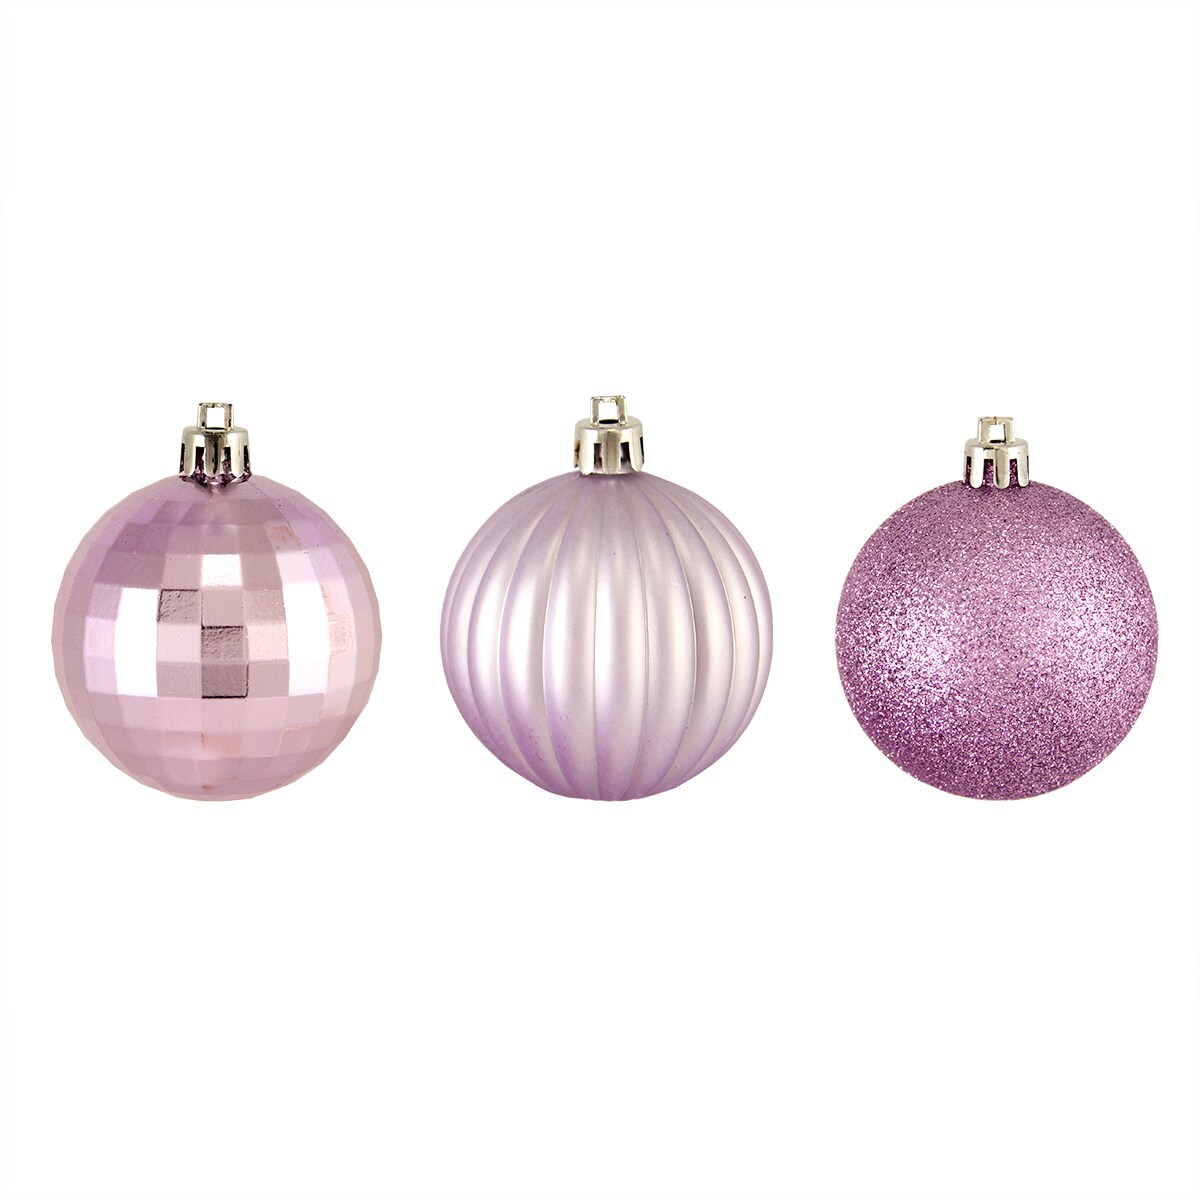 100-Count Multicolored  Holiday Shatter-Resistant Ornament 